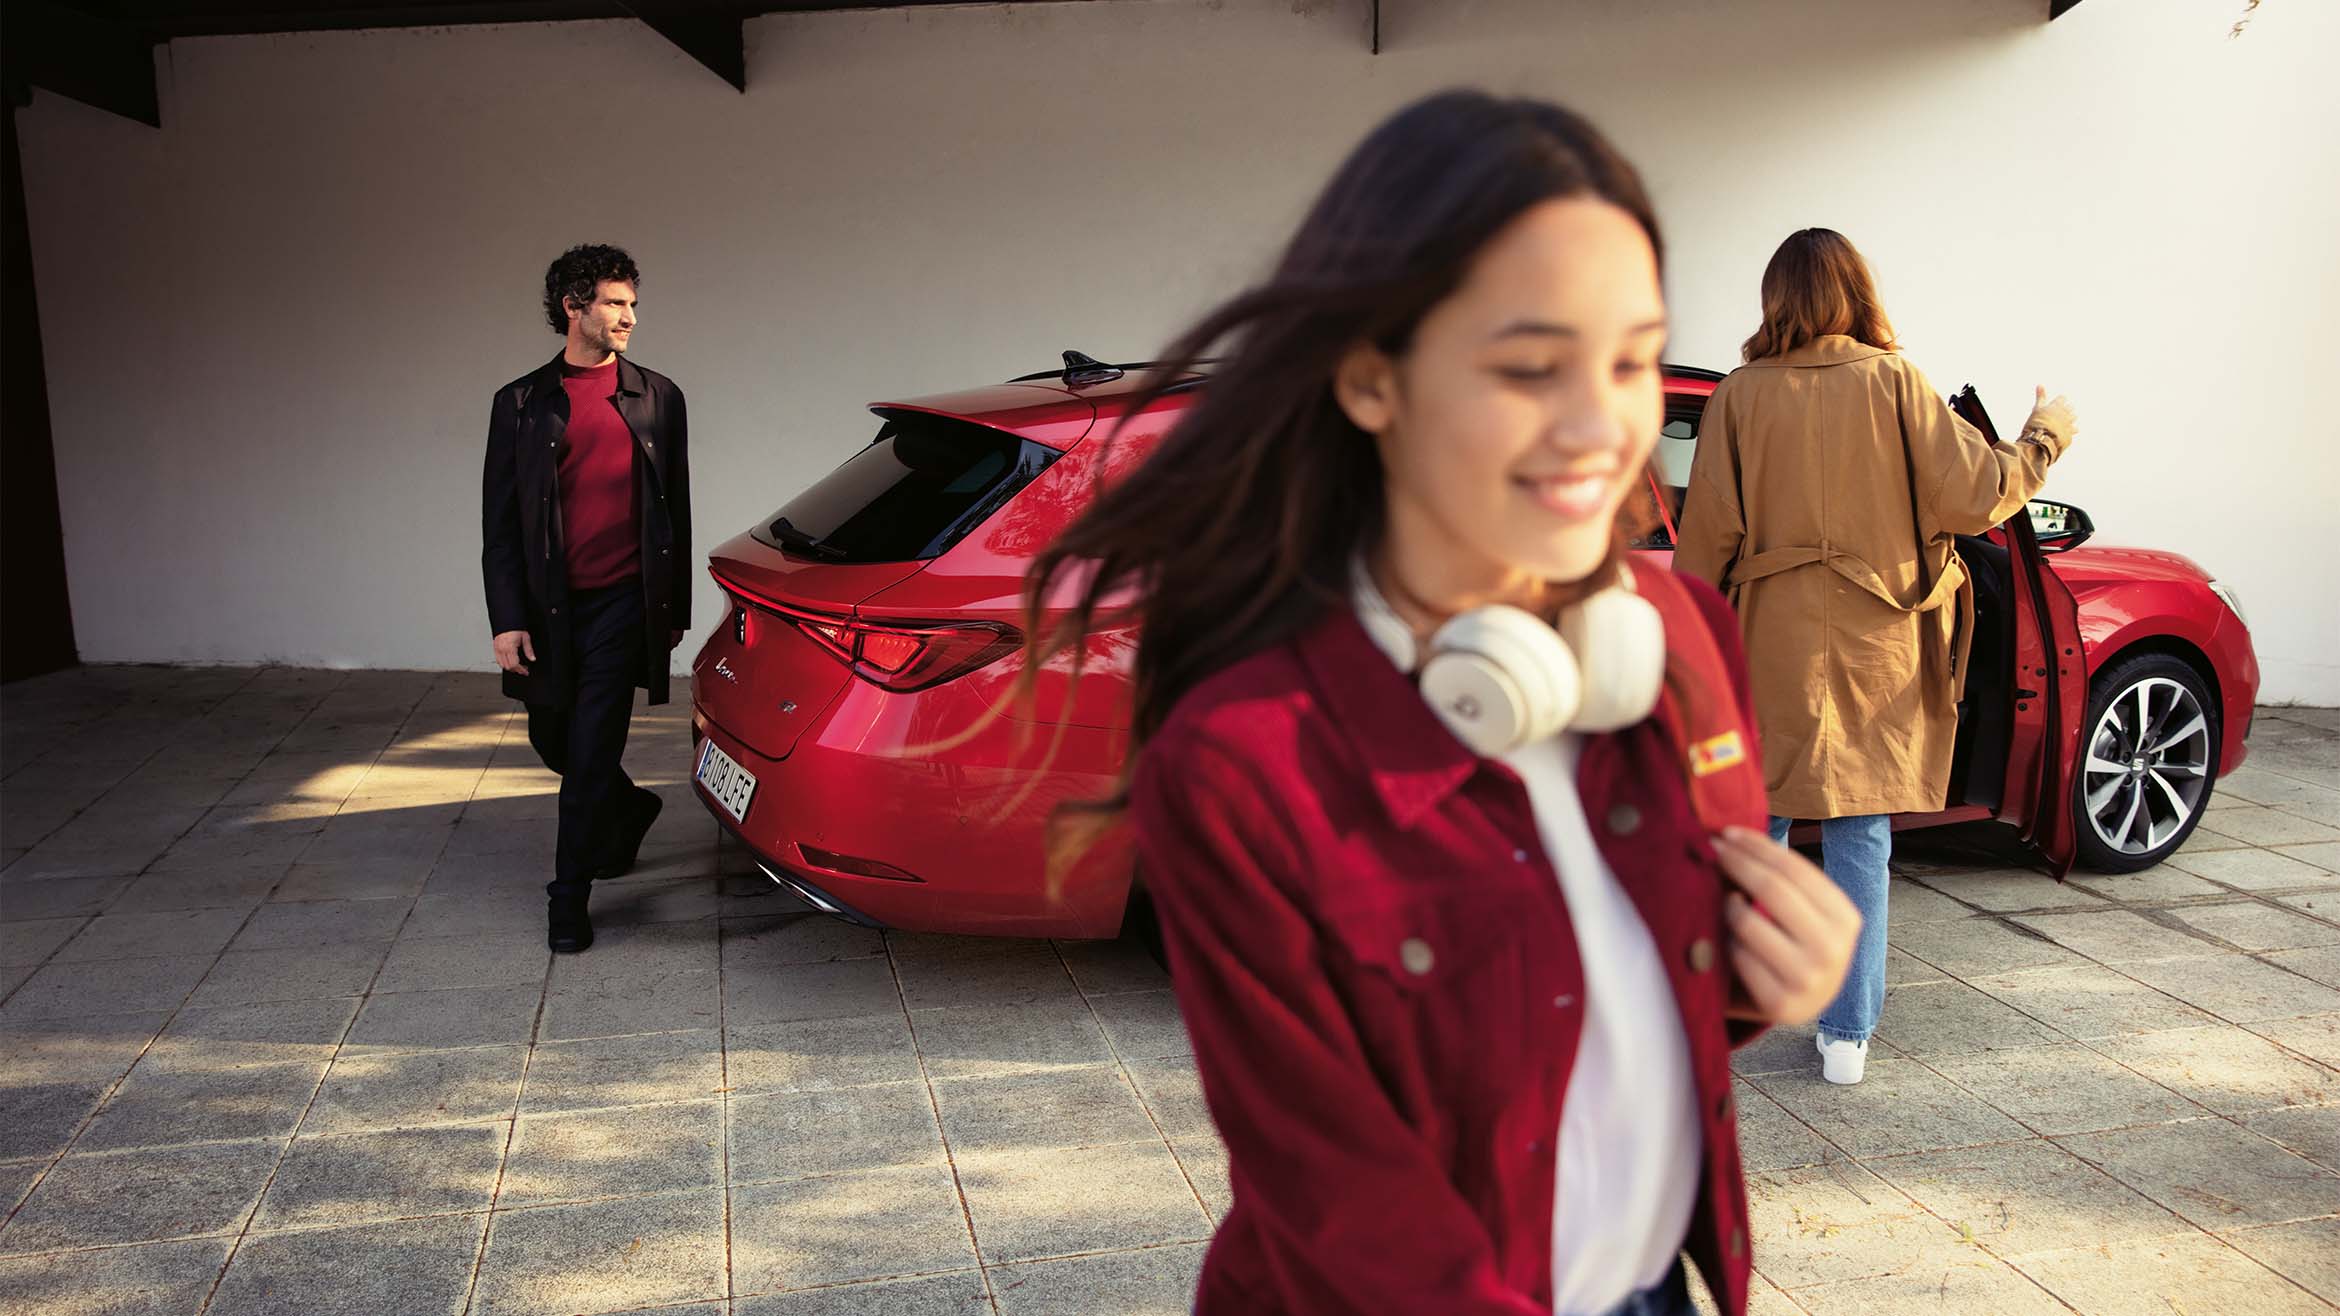 A red SEAT Leon SP Heather OW parked in a driveway with a family around it. The car features sleek, aerodynamic lines, LED taillights and a spacious interior. A man stands near the rear of the car, a woman is opening the rear door and a young girl with headphones is walking in the foreground, highlighting the car's family-friendly design and modern features.